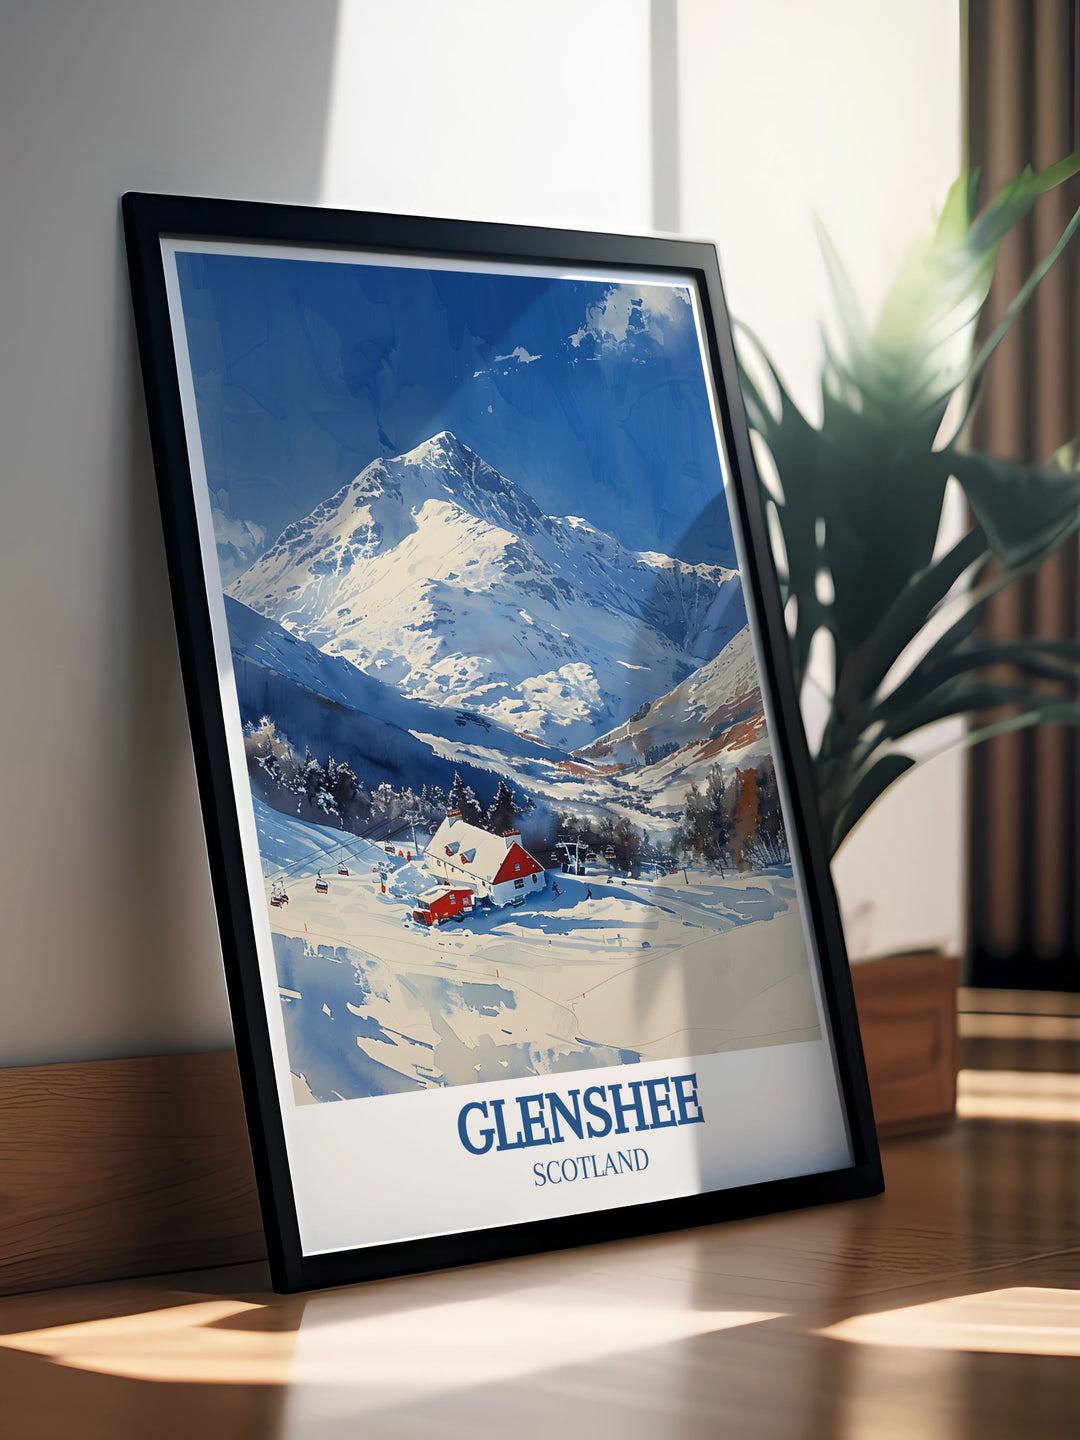 Showcasing the excitement of Glenshee, this poster is perfect for those who love winter sports. The detailed illustrations highlight the resorts trails and facilities, bringing the adventure of skiing in Scotland into your home.